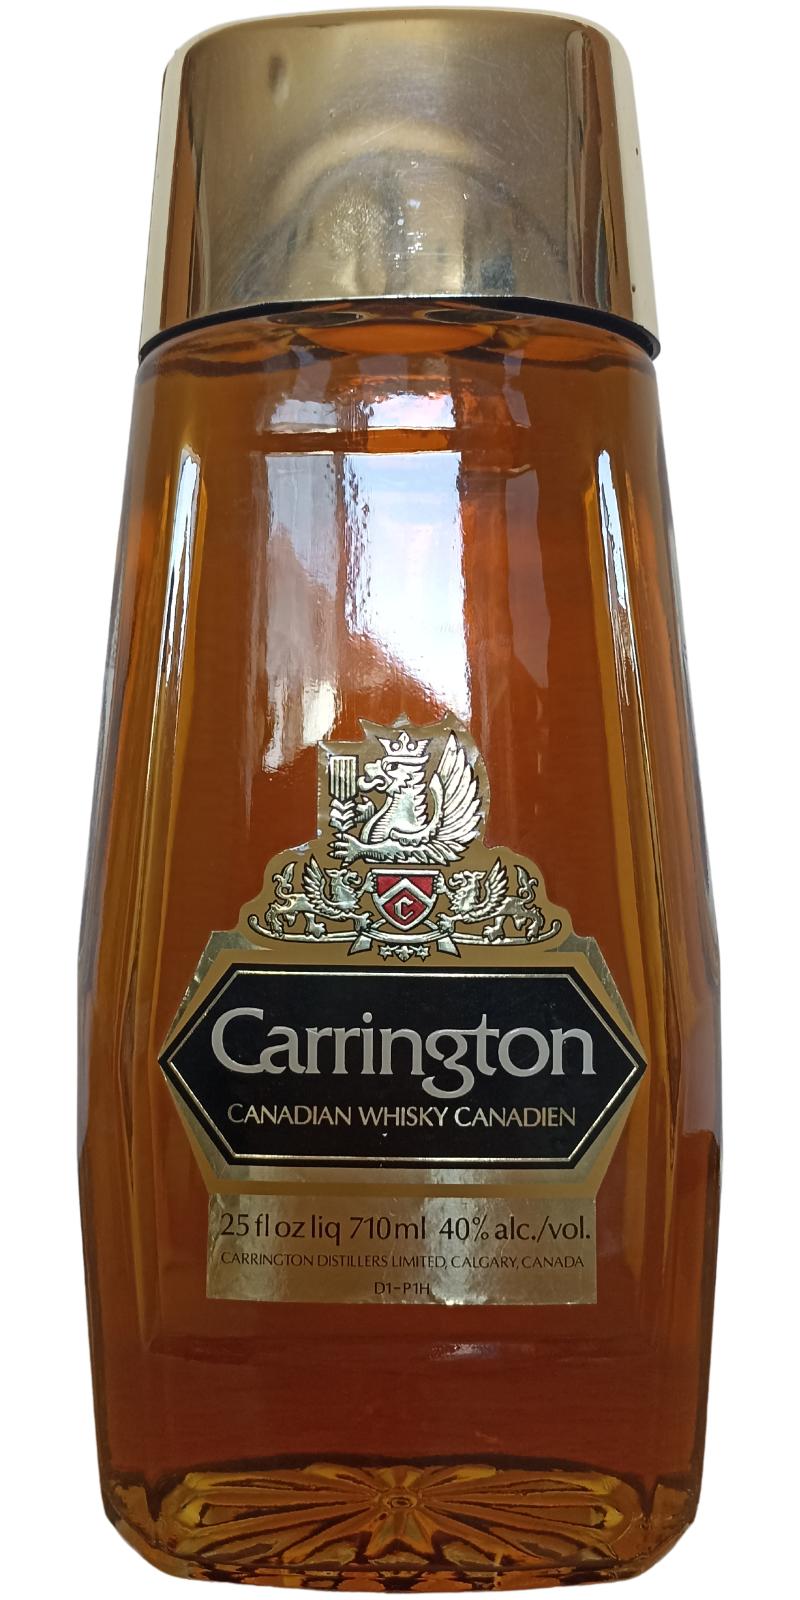 Carrington Canadian Whisky Canadien - Ratings and reviews - Whiskybase